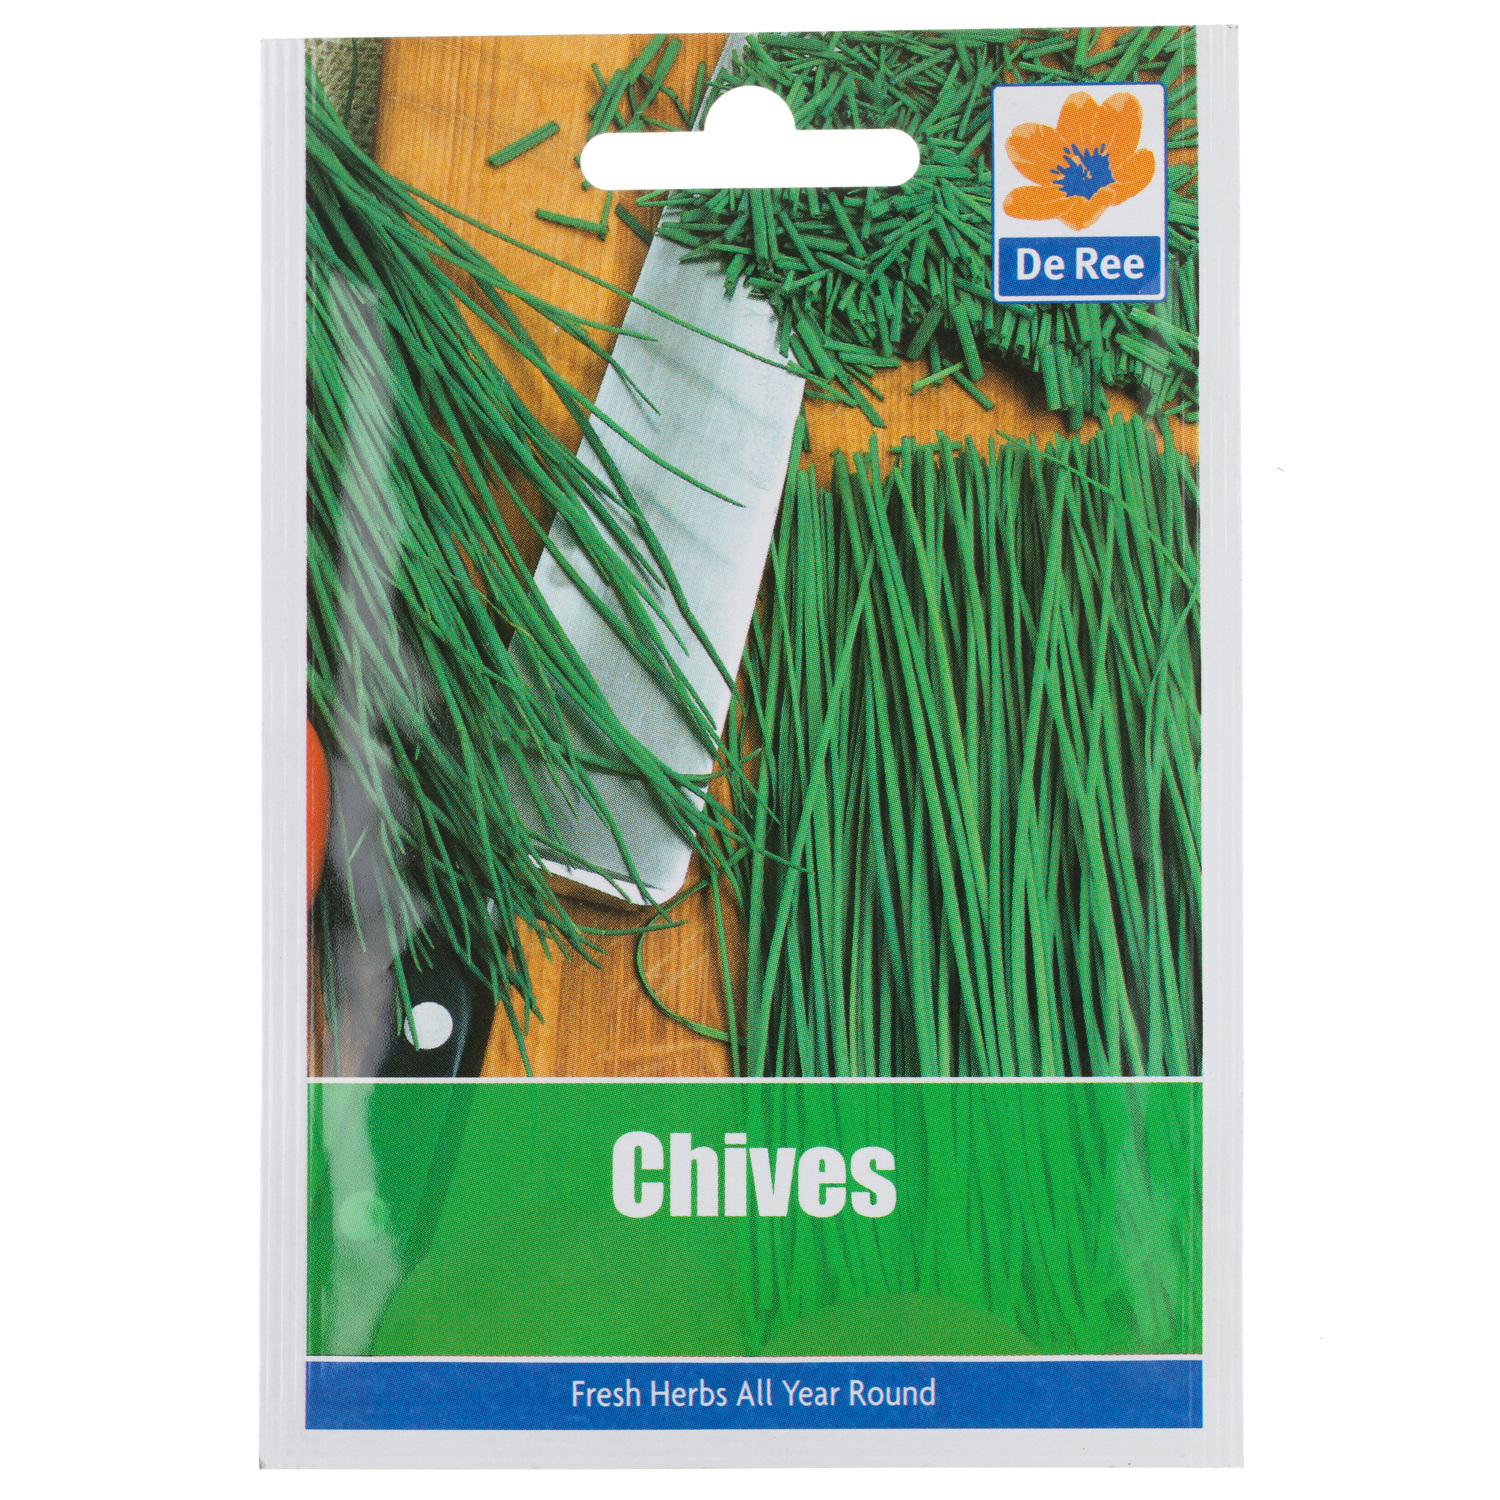 Chives Seed Packet Image